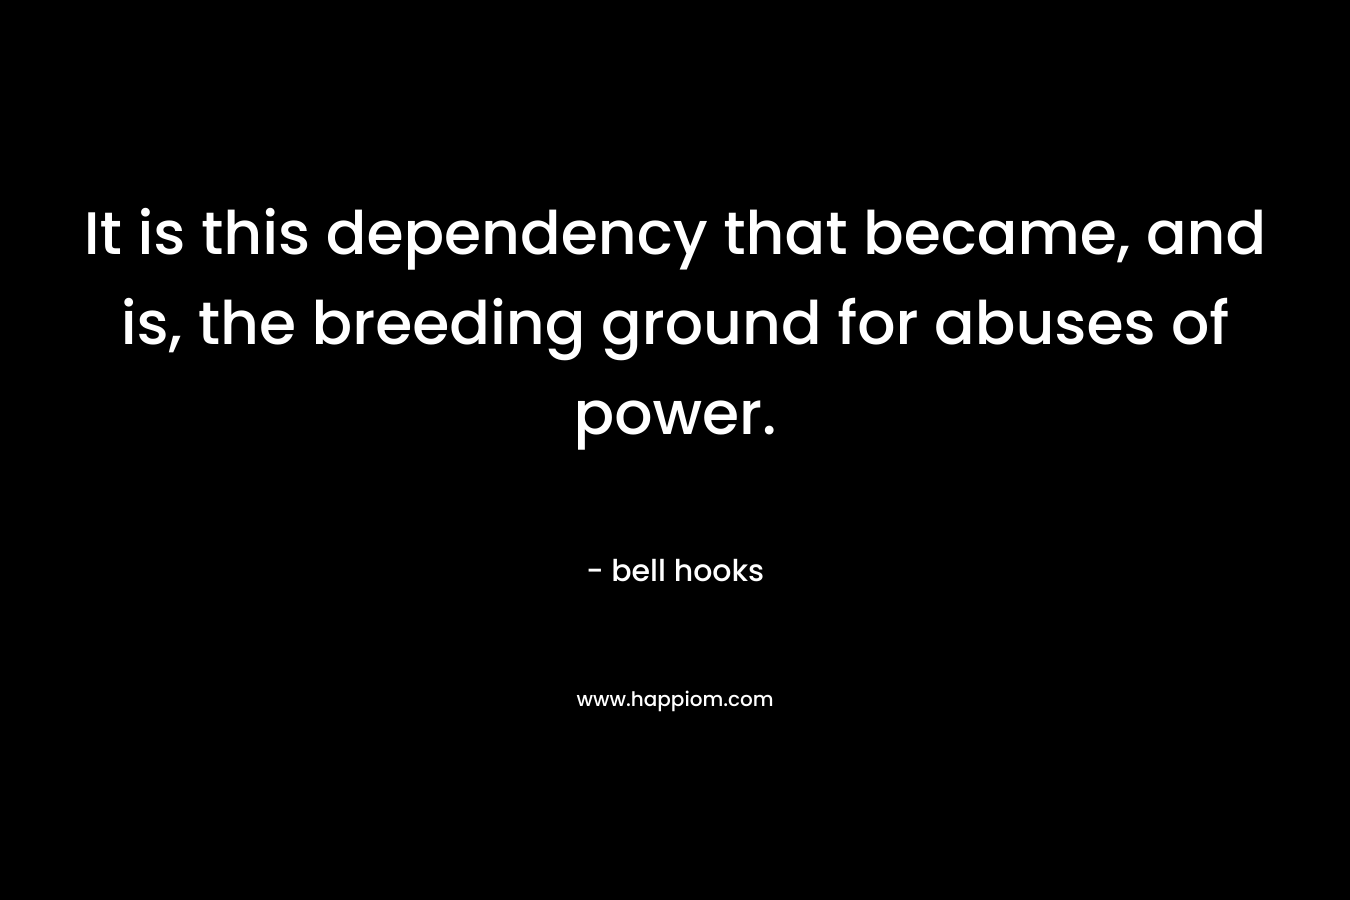 It is this dependency that became, and is, the breeding ground for abuses of power. – bell hooks